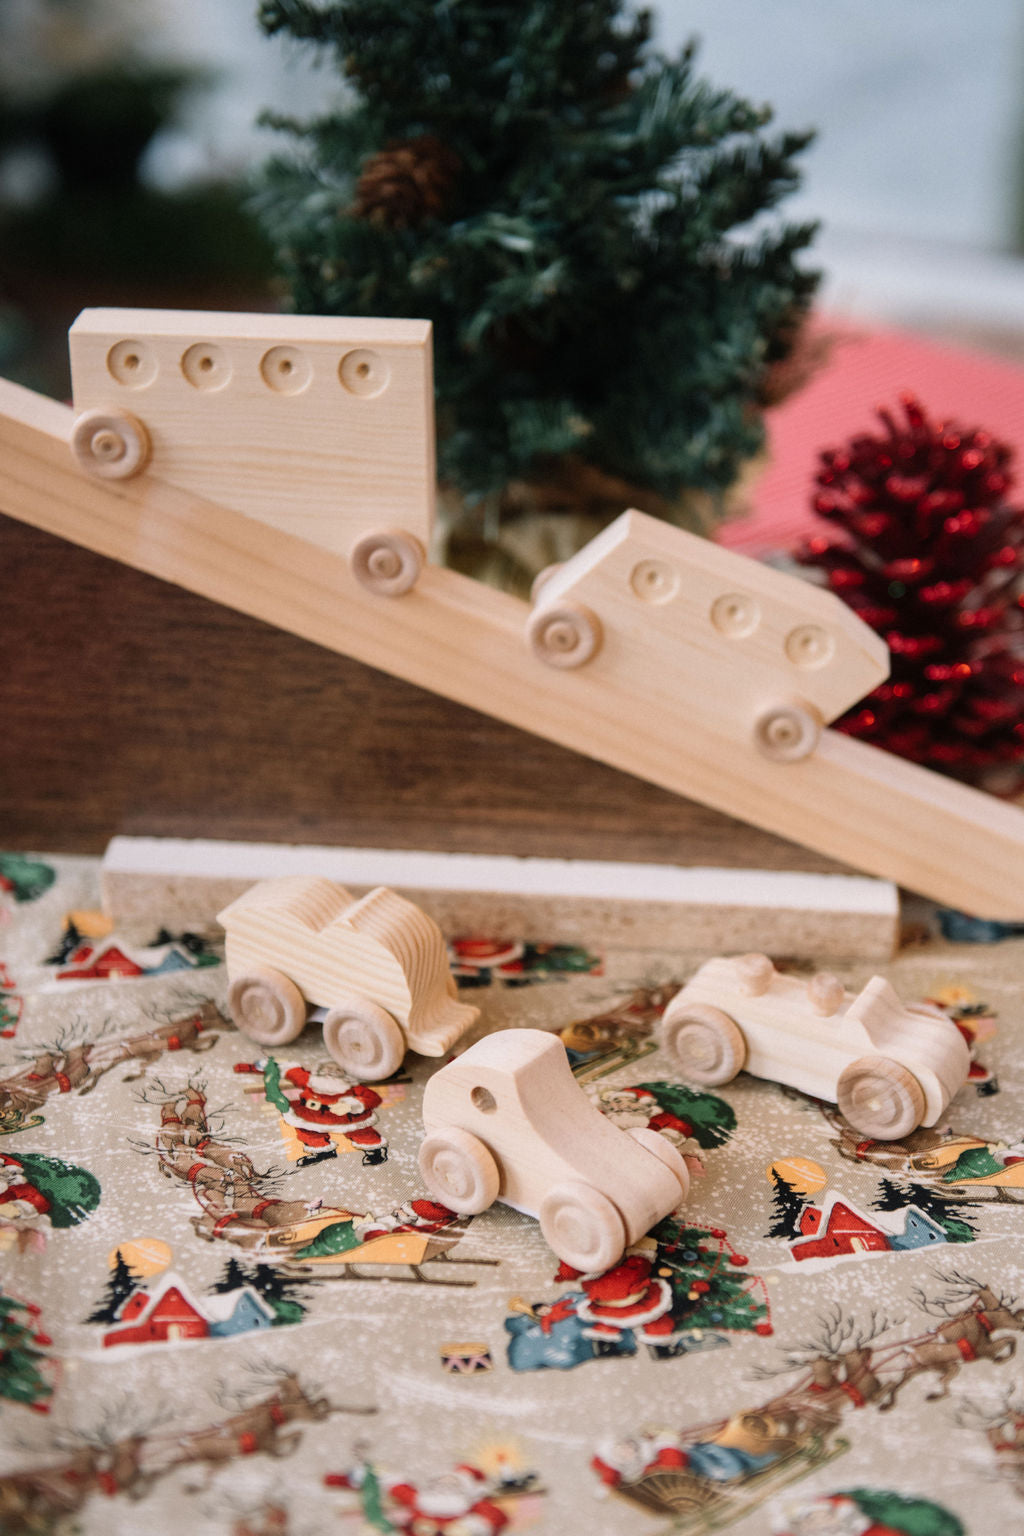 Wooden Incline Cars Toy